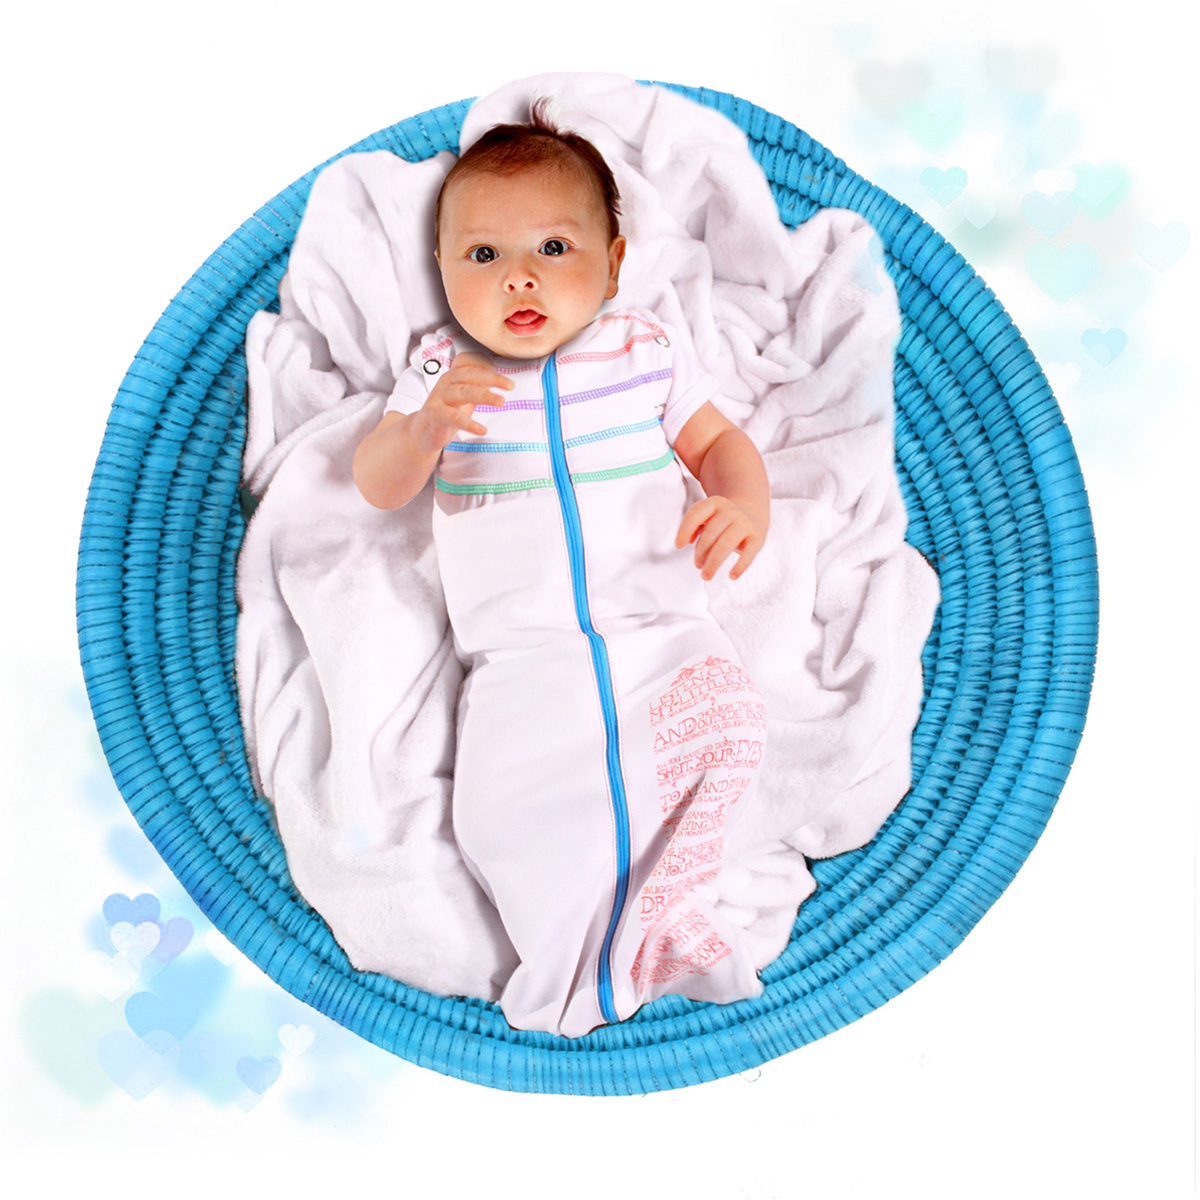 Sleep Sacs babies swaddles safe sleep Canadian made happy babies convenient fire tested fabric functional